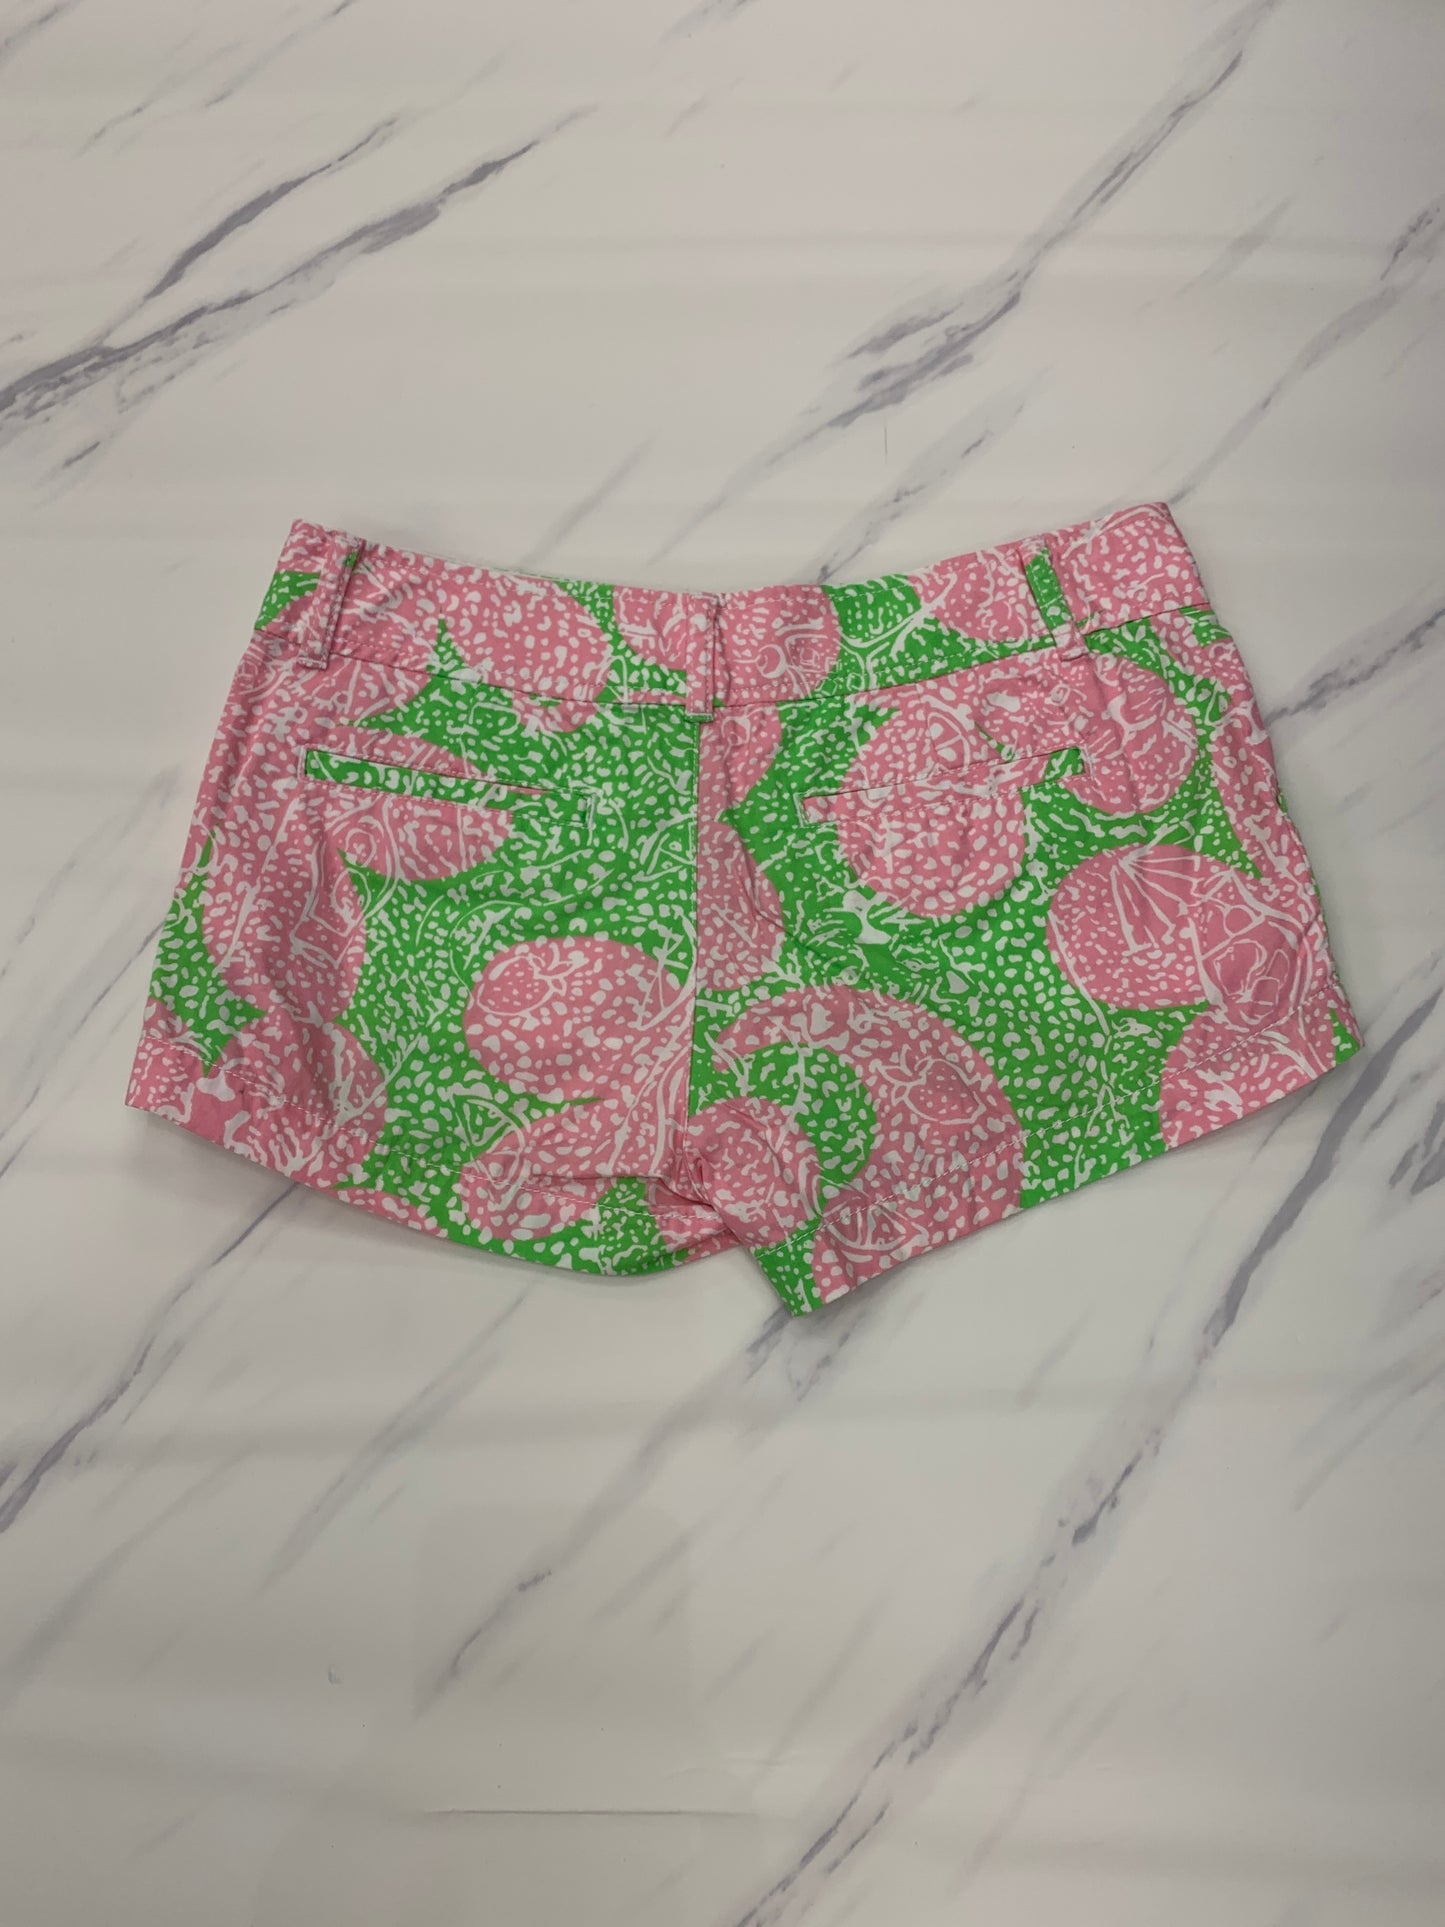 Shorts Designer By Lilly Pulitzer  Size: 0